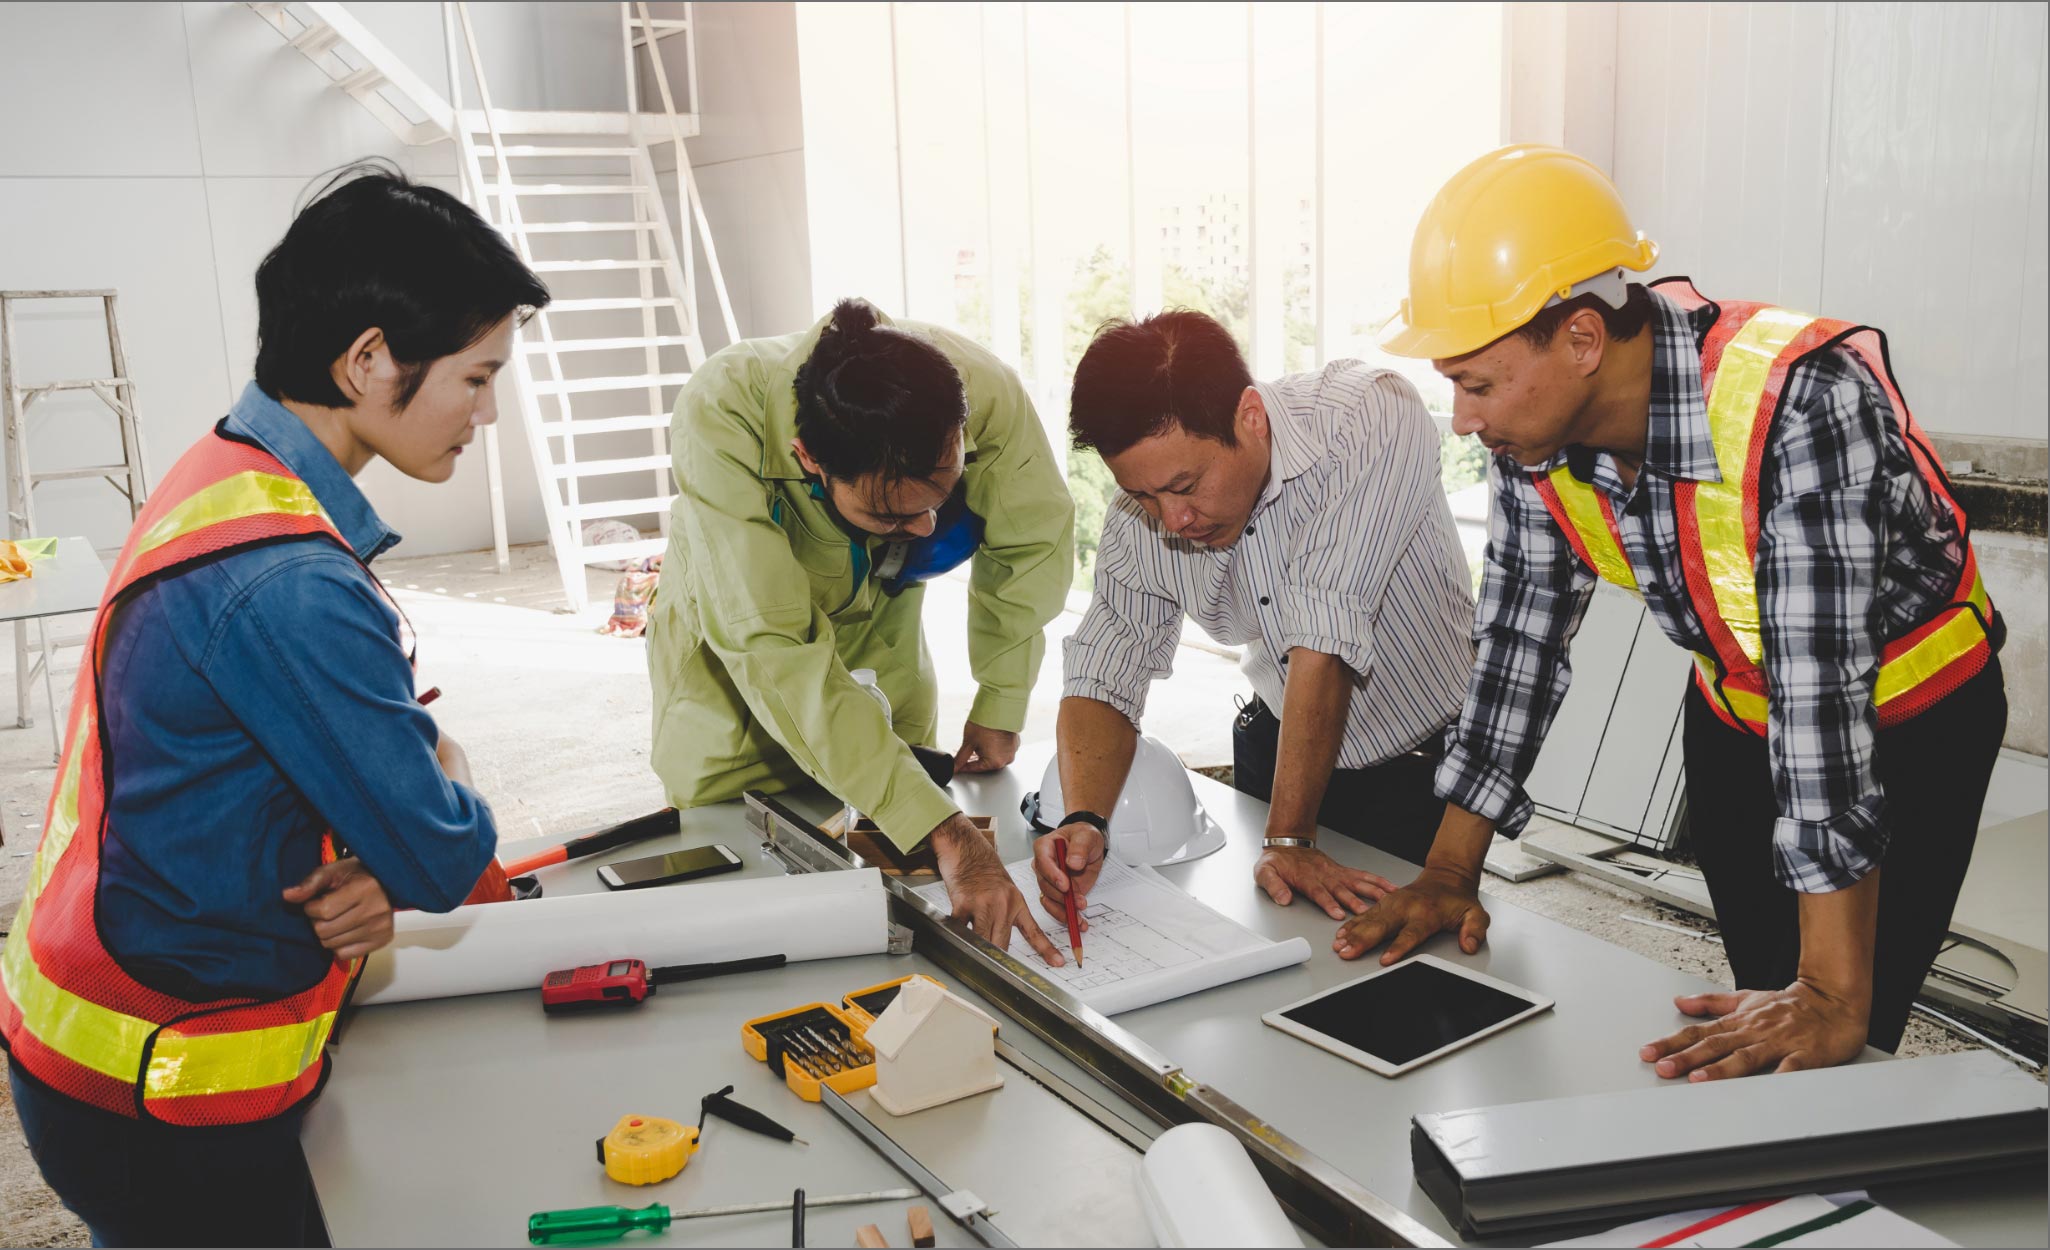 A group of workers review plans on a work site.